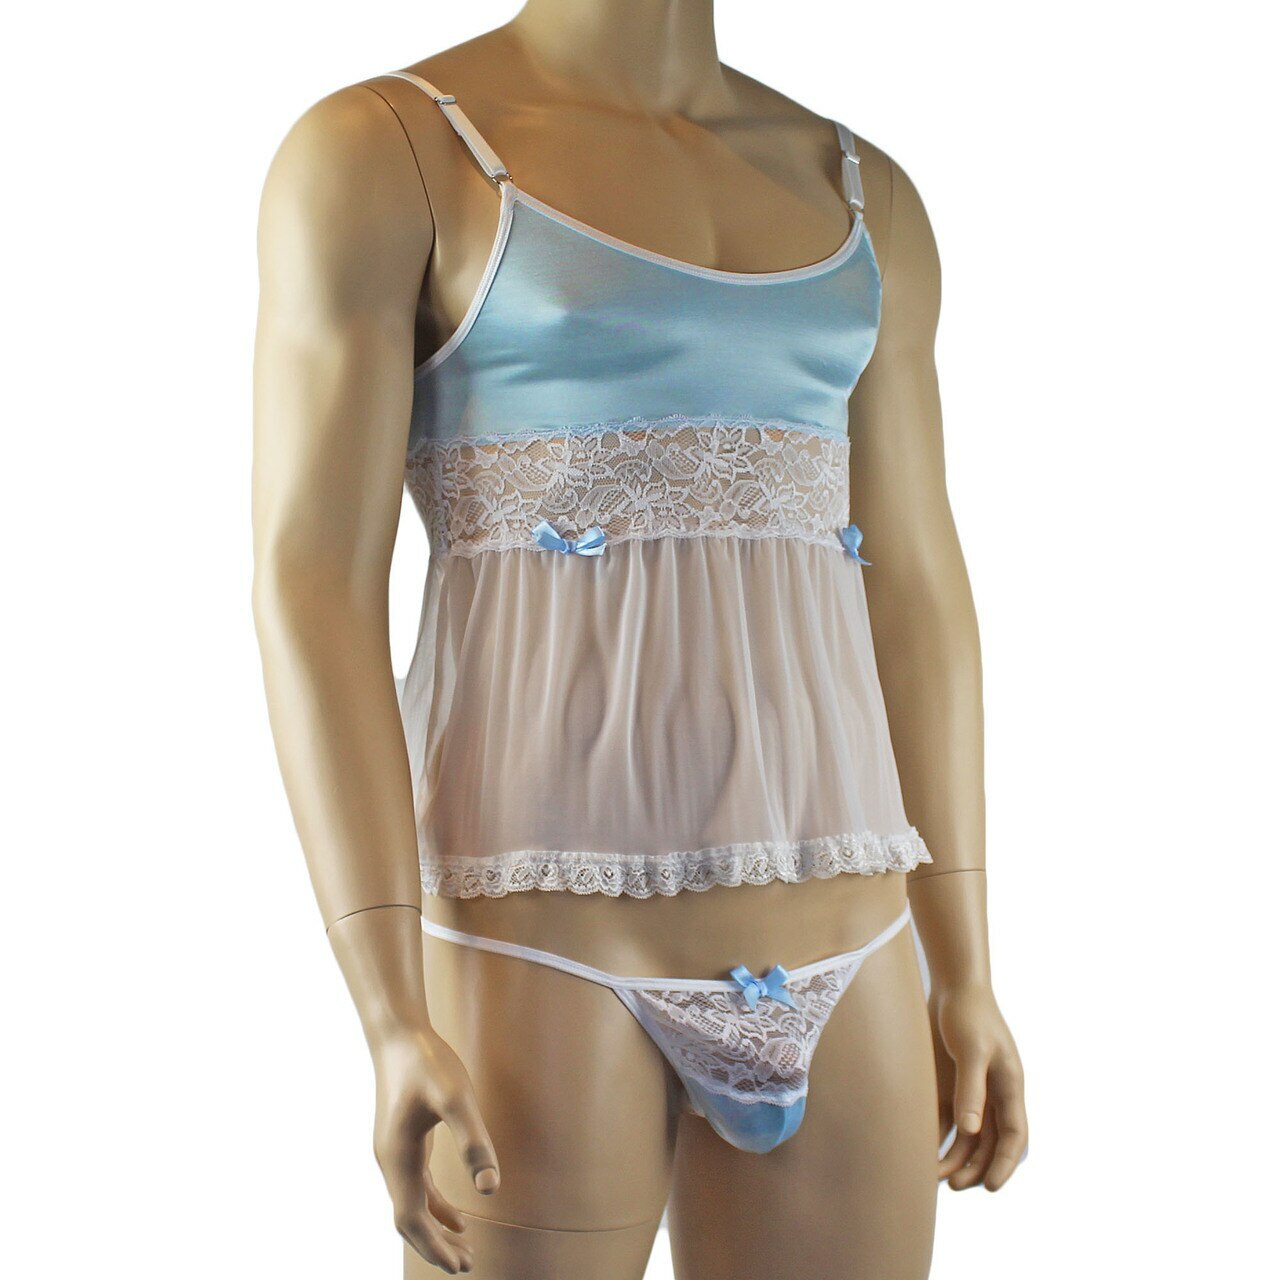 Mens Mini Babydoll Camisole & G string (light blue and white plus other colours)